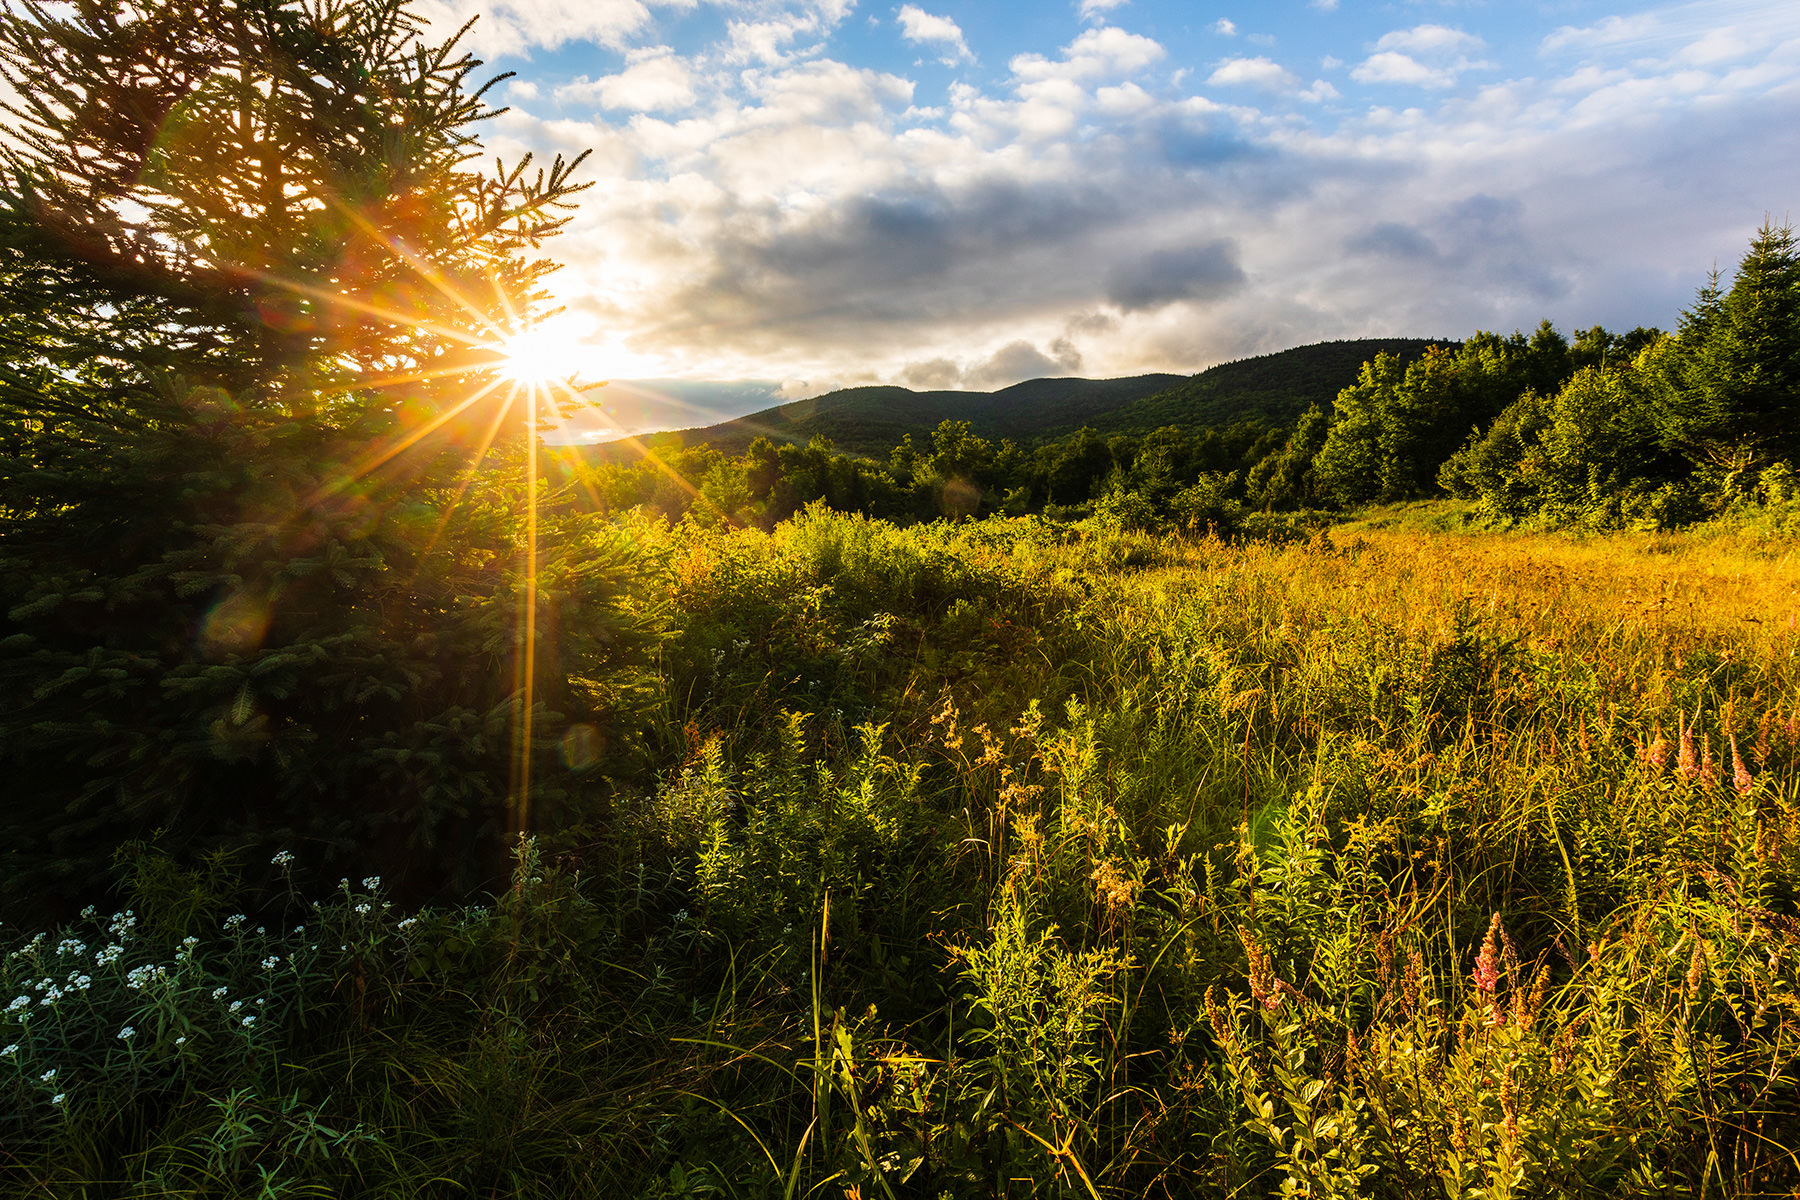 The sun rises above a meadow and mountain.